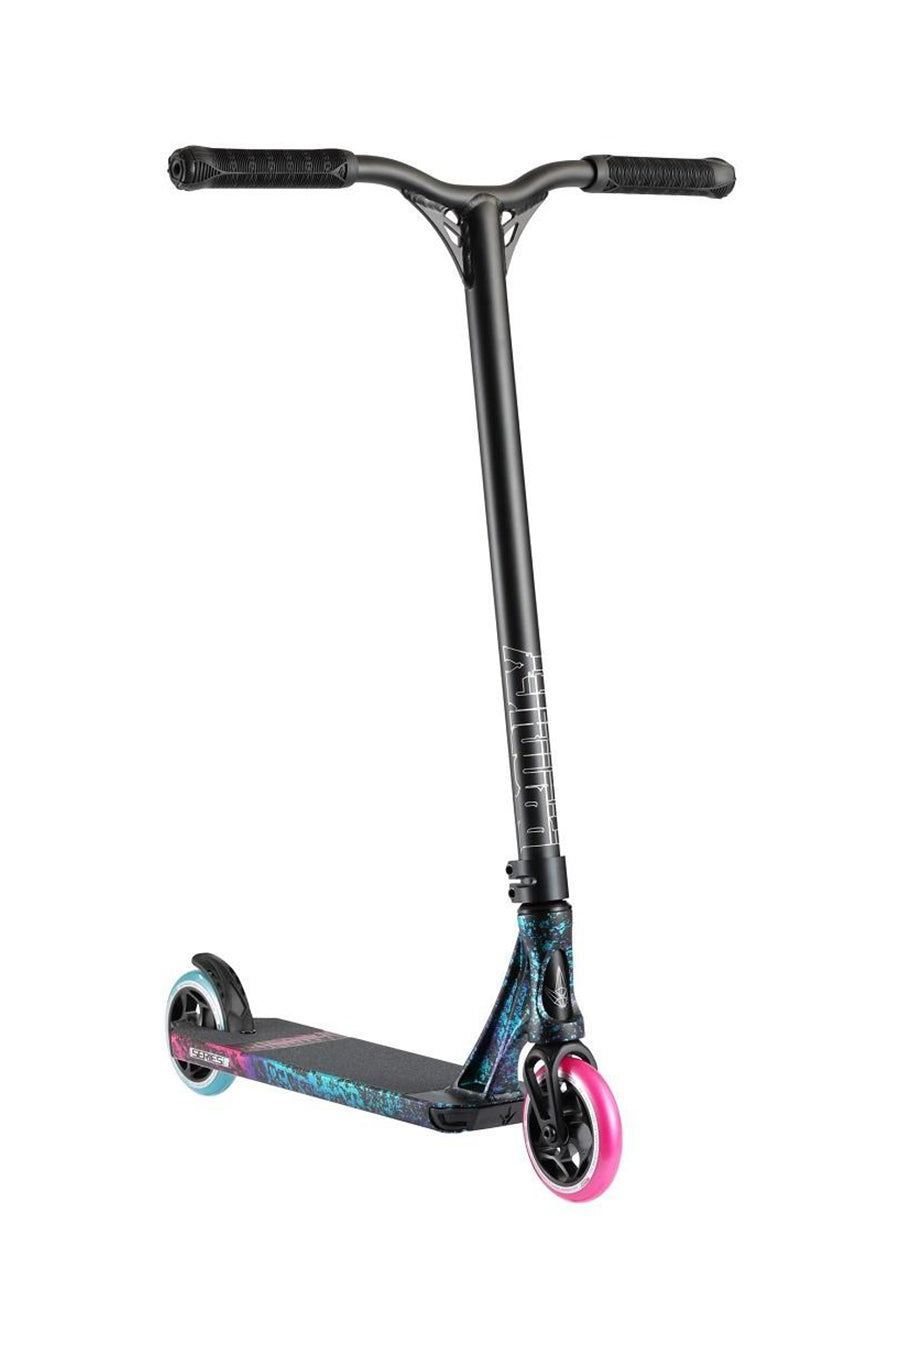 Envy Prodigy S8 Complete Scooter (Dusk)